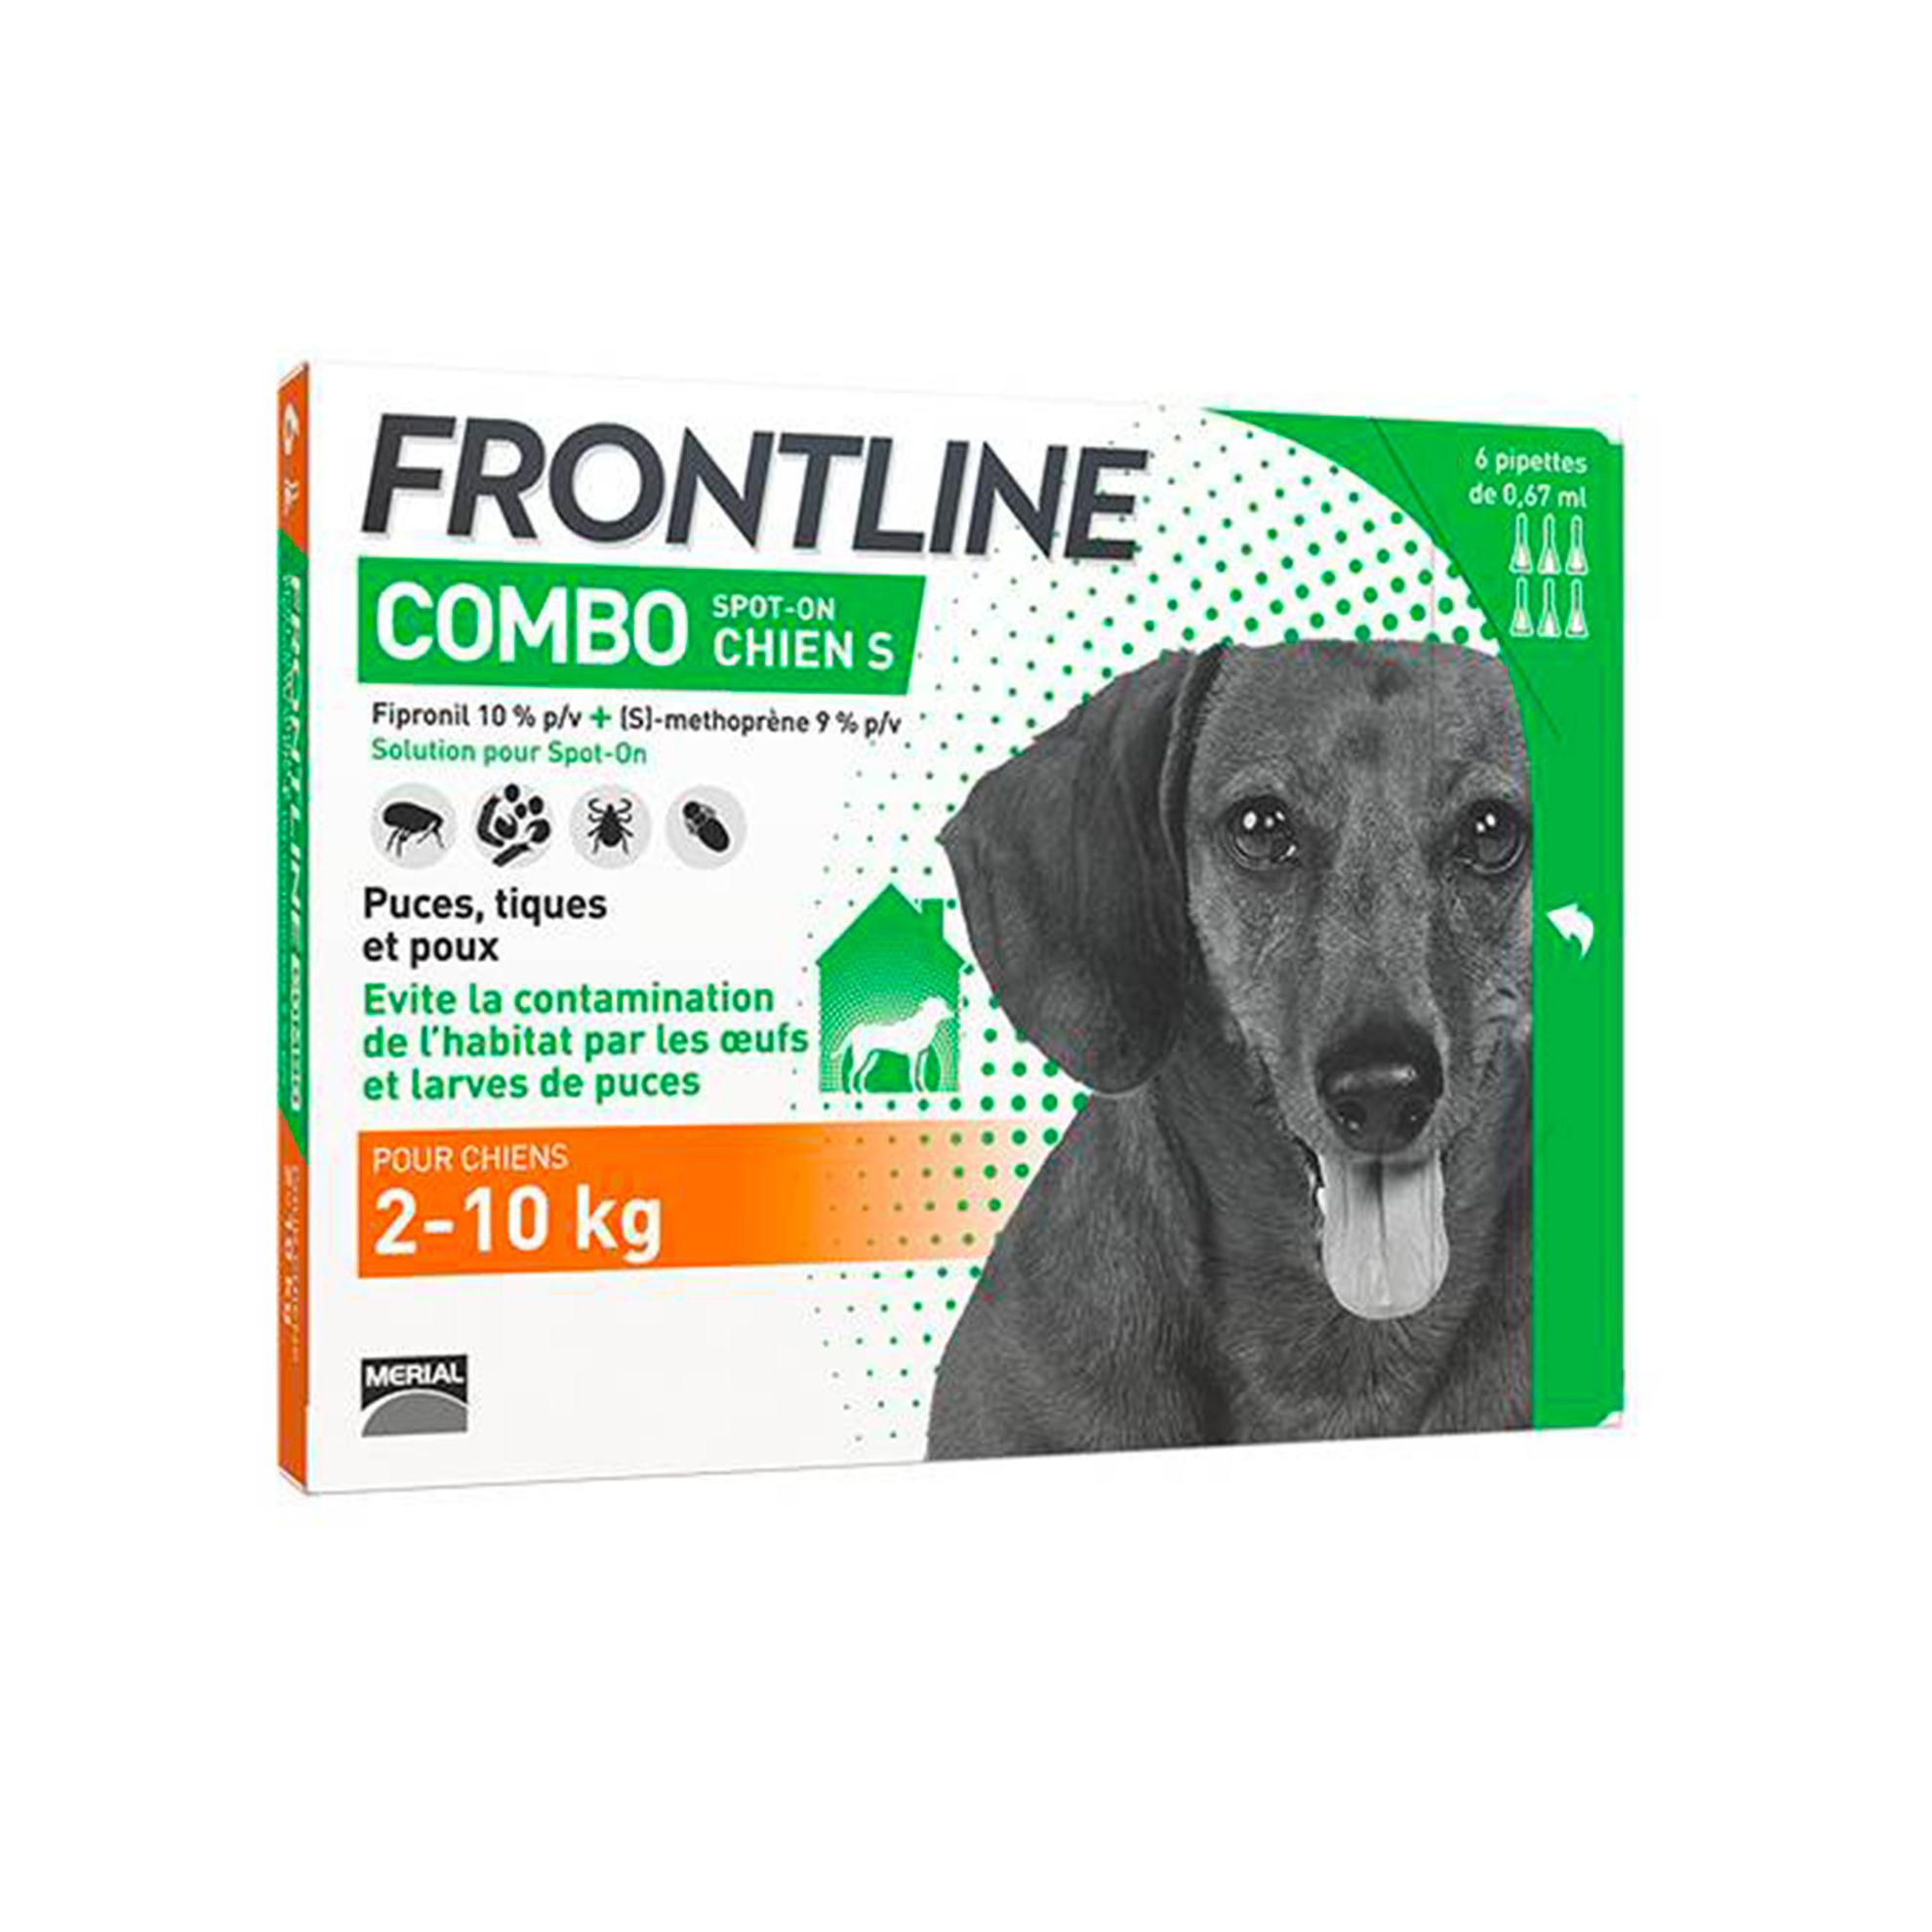 Pipettes Frontline Combo Chien Pipettes Natur Animo Notre Passion Vos Animaux